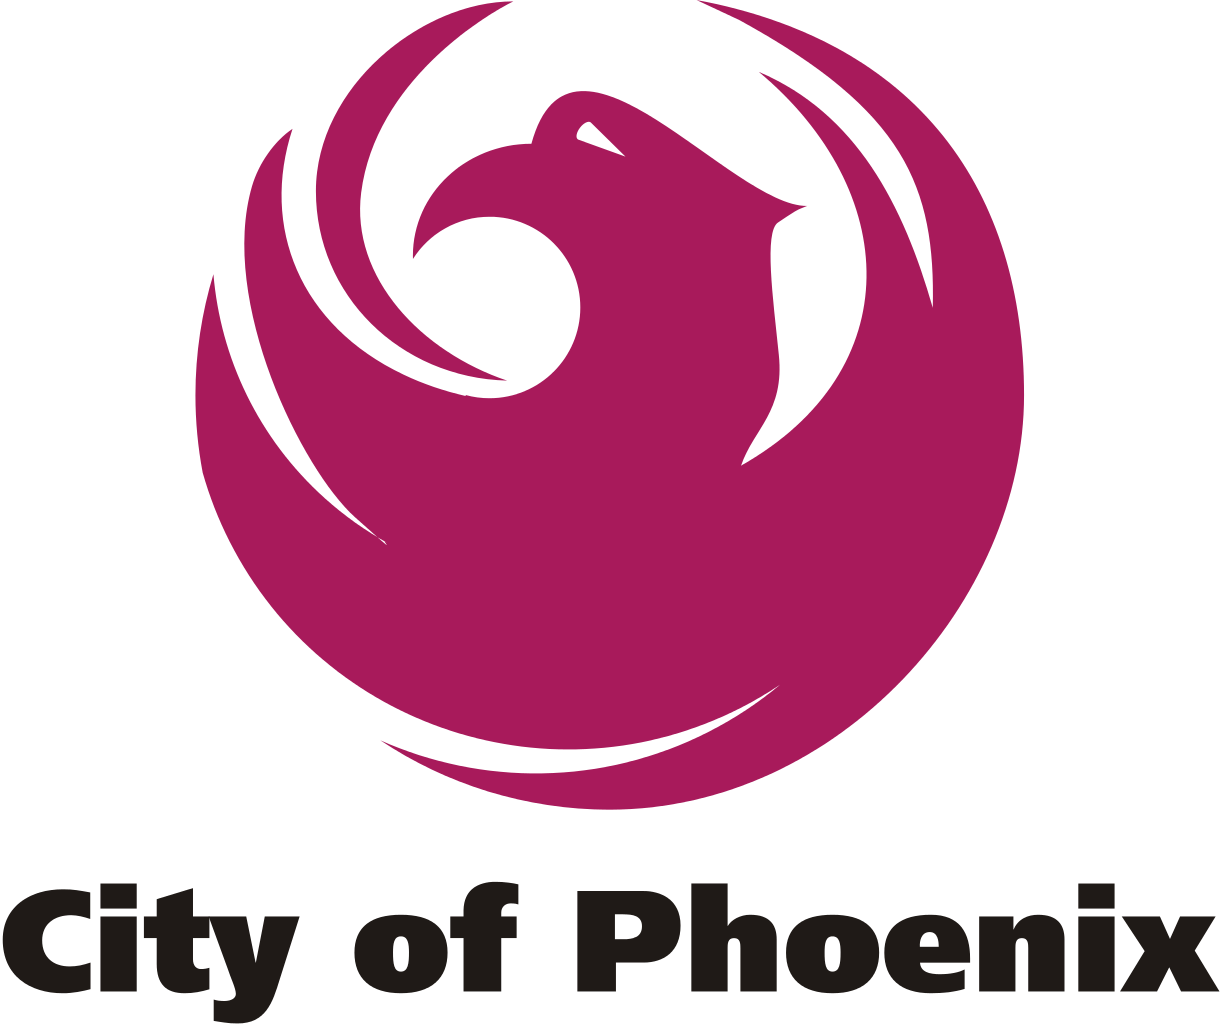 Phoenix City Bird Logo - What's in a name: How the City of Phoenix really got its name ...